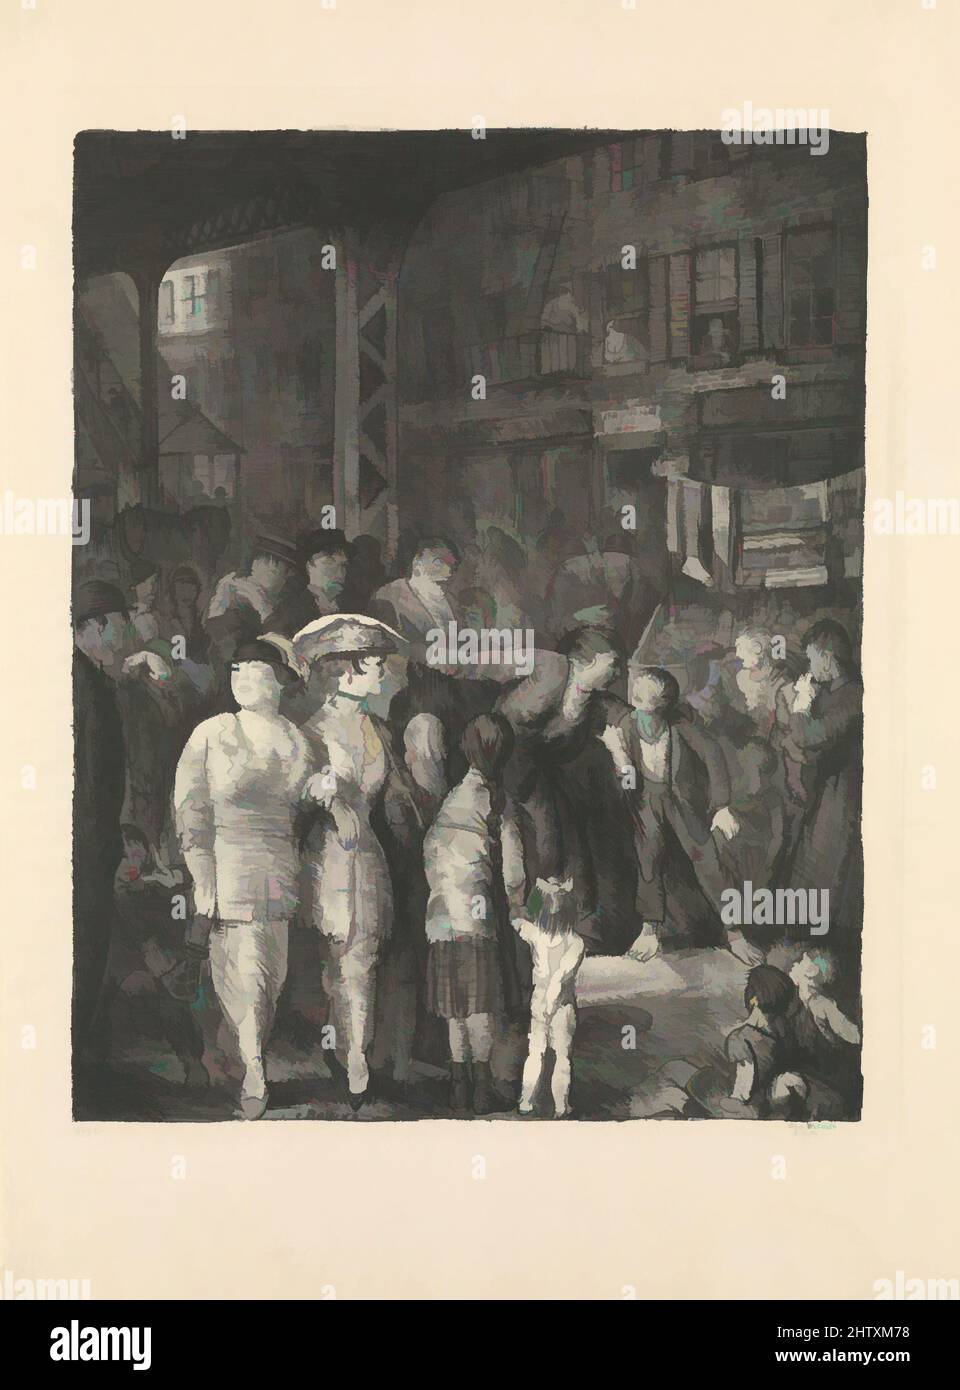 Art inspired by The Street, 1917, Lithograph, image: 19 x 15 1/4 in. (48.3 x 38.7 cm), Prints, George Bellows (American, Columbus, Ohio 1882–1925 New York, Classic works modernized by Artotop with a splash of modernity. Shapes, color and value, eye-catching visual impact on art. Emotions through freedom of artworks in a contemporary way. A timeless message pursuing a wildly creative new direction. Artists turning to the digital medium and creating the Artotop NFT Stock Photo